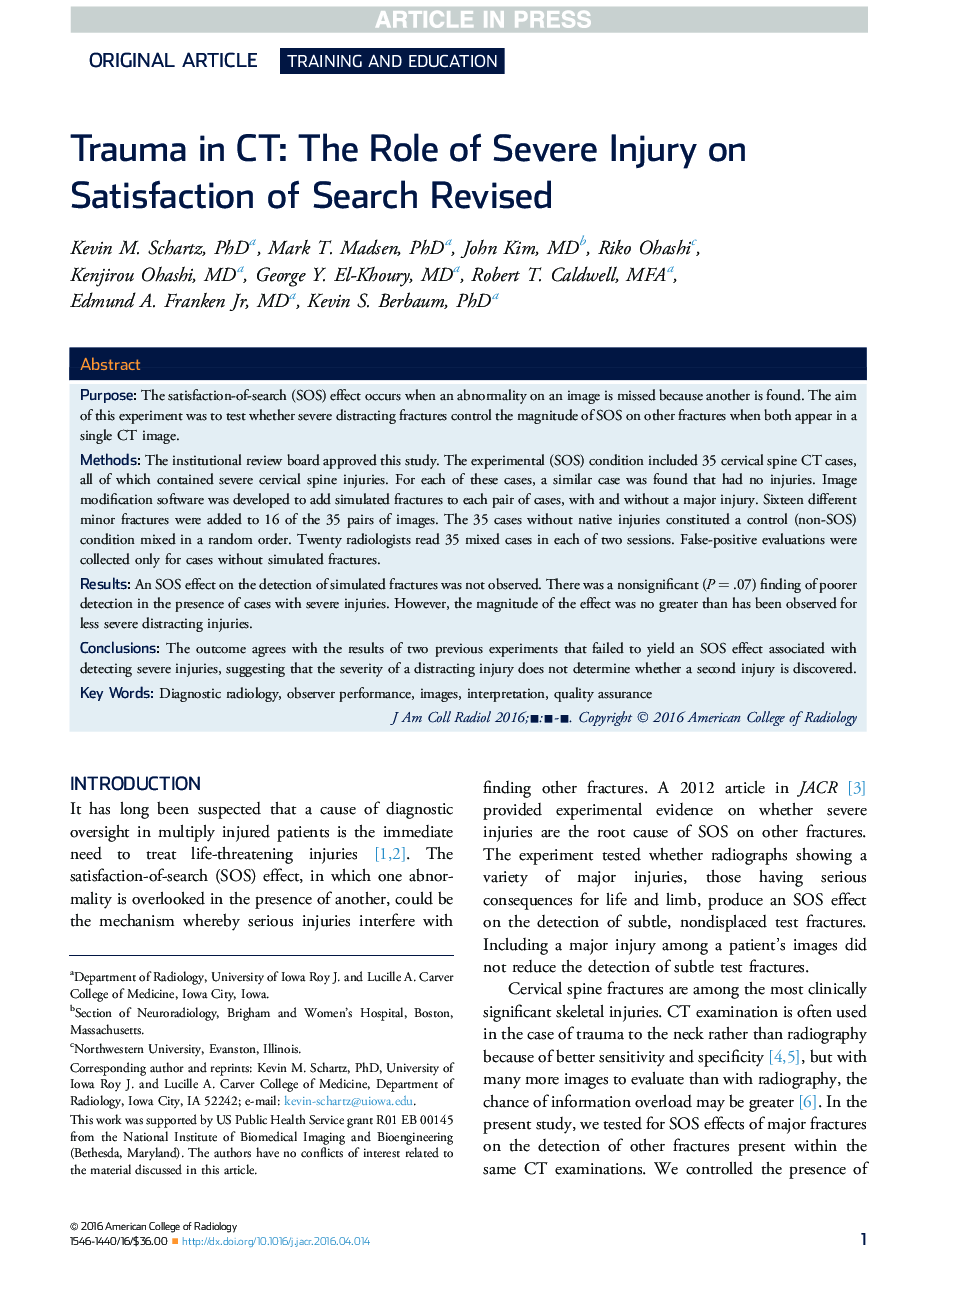 Trauma in CT: The Role of Severe Injury on Satisfaction of Search Revised